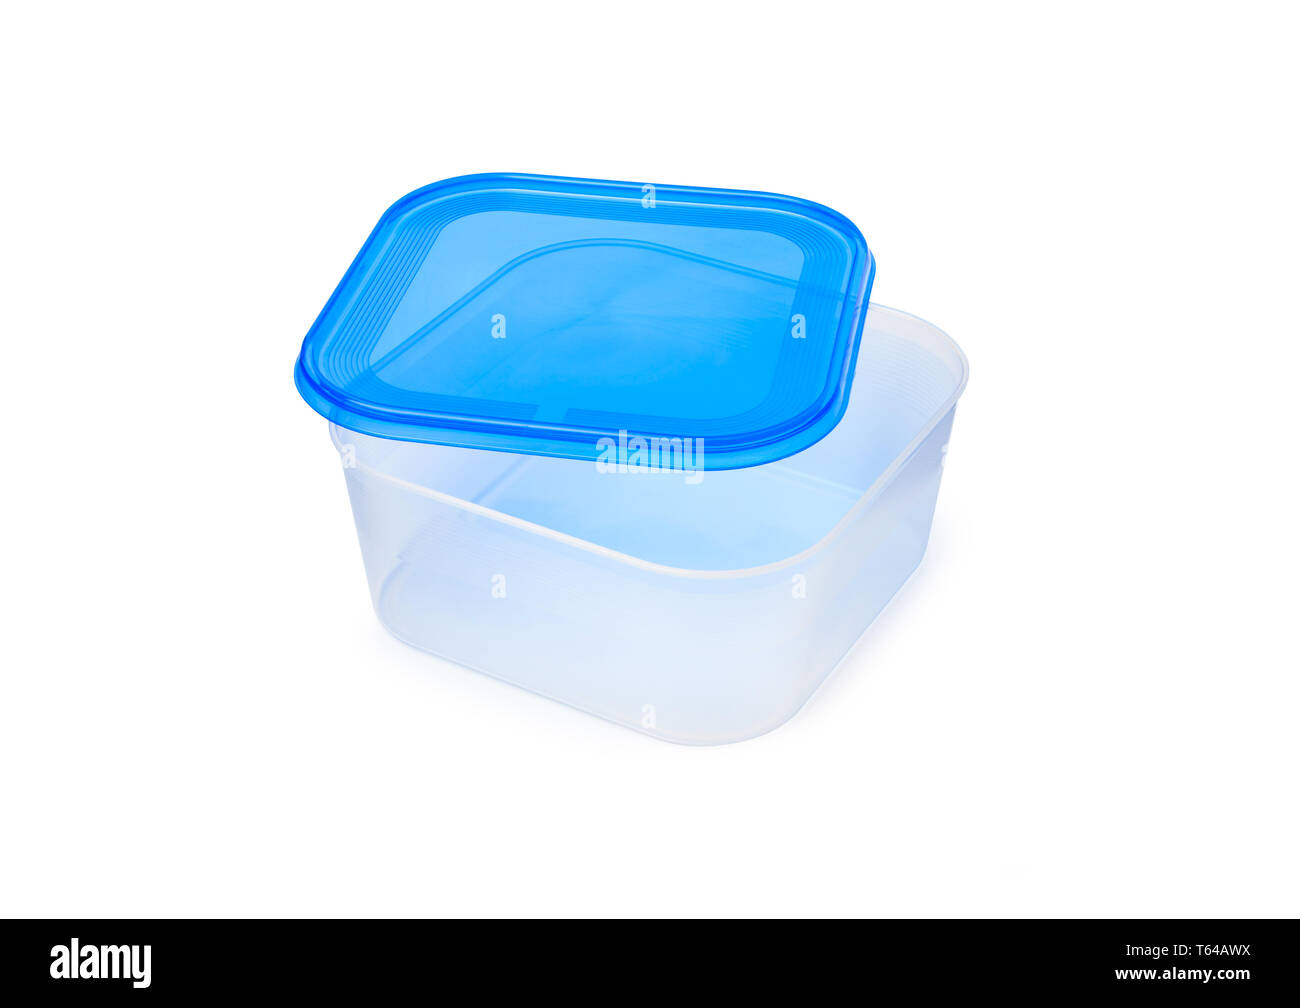 https://c8.alamy.com/comp/T64AWX/plastic-food-storage-containers-on-a-white-background-with-clipping-path-T64AWX.jpg